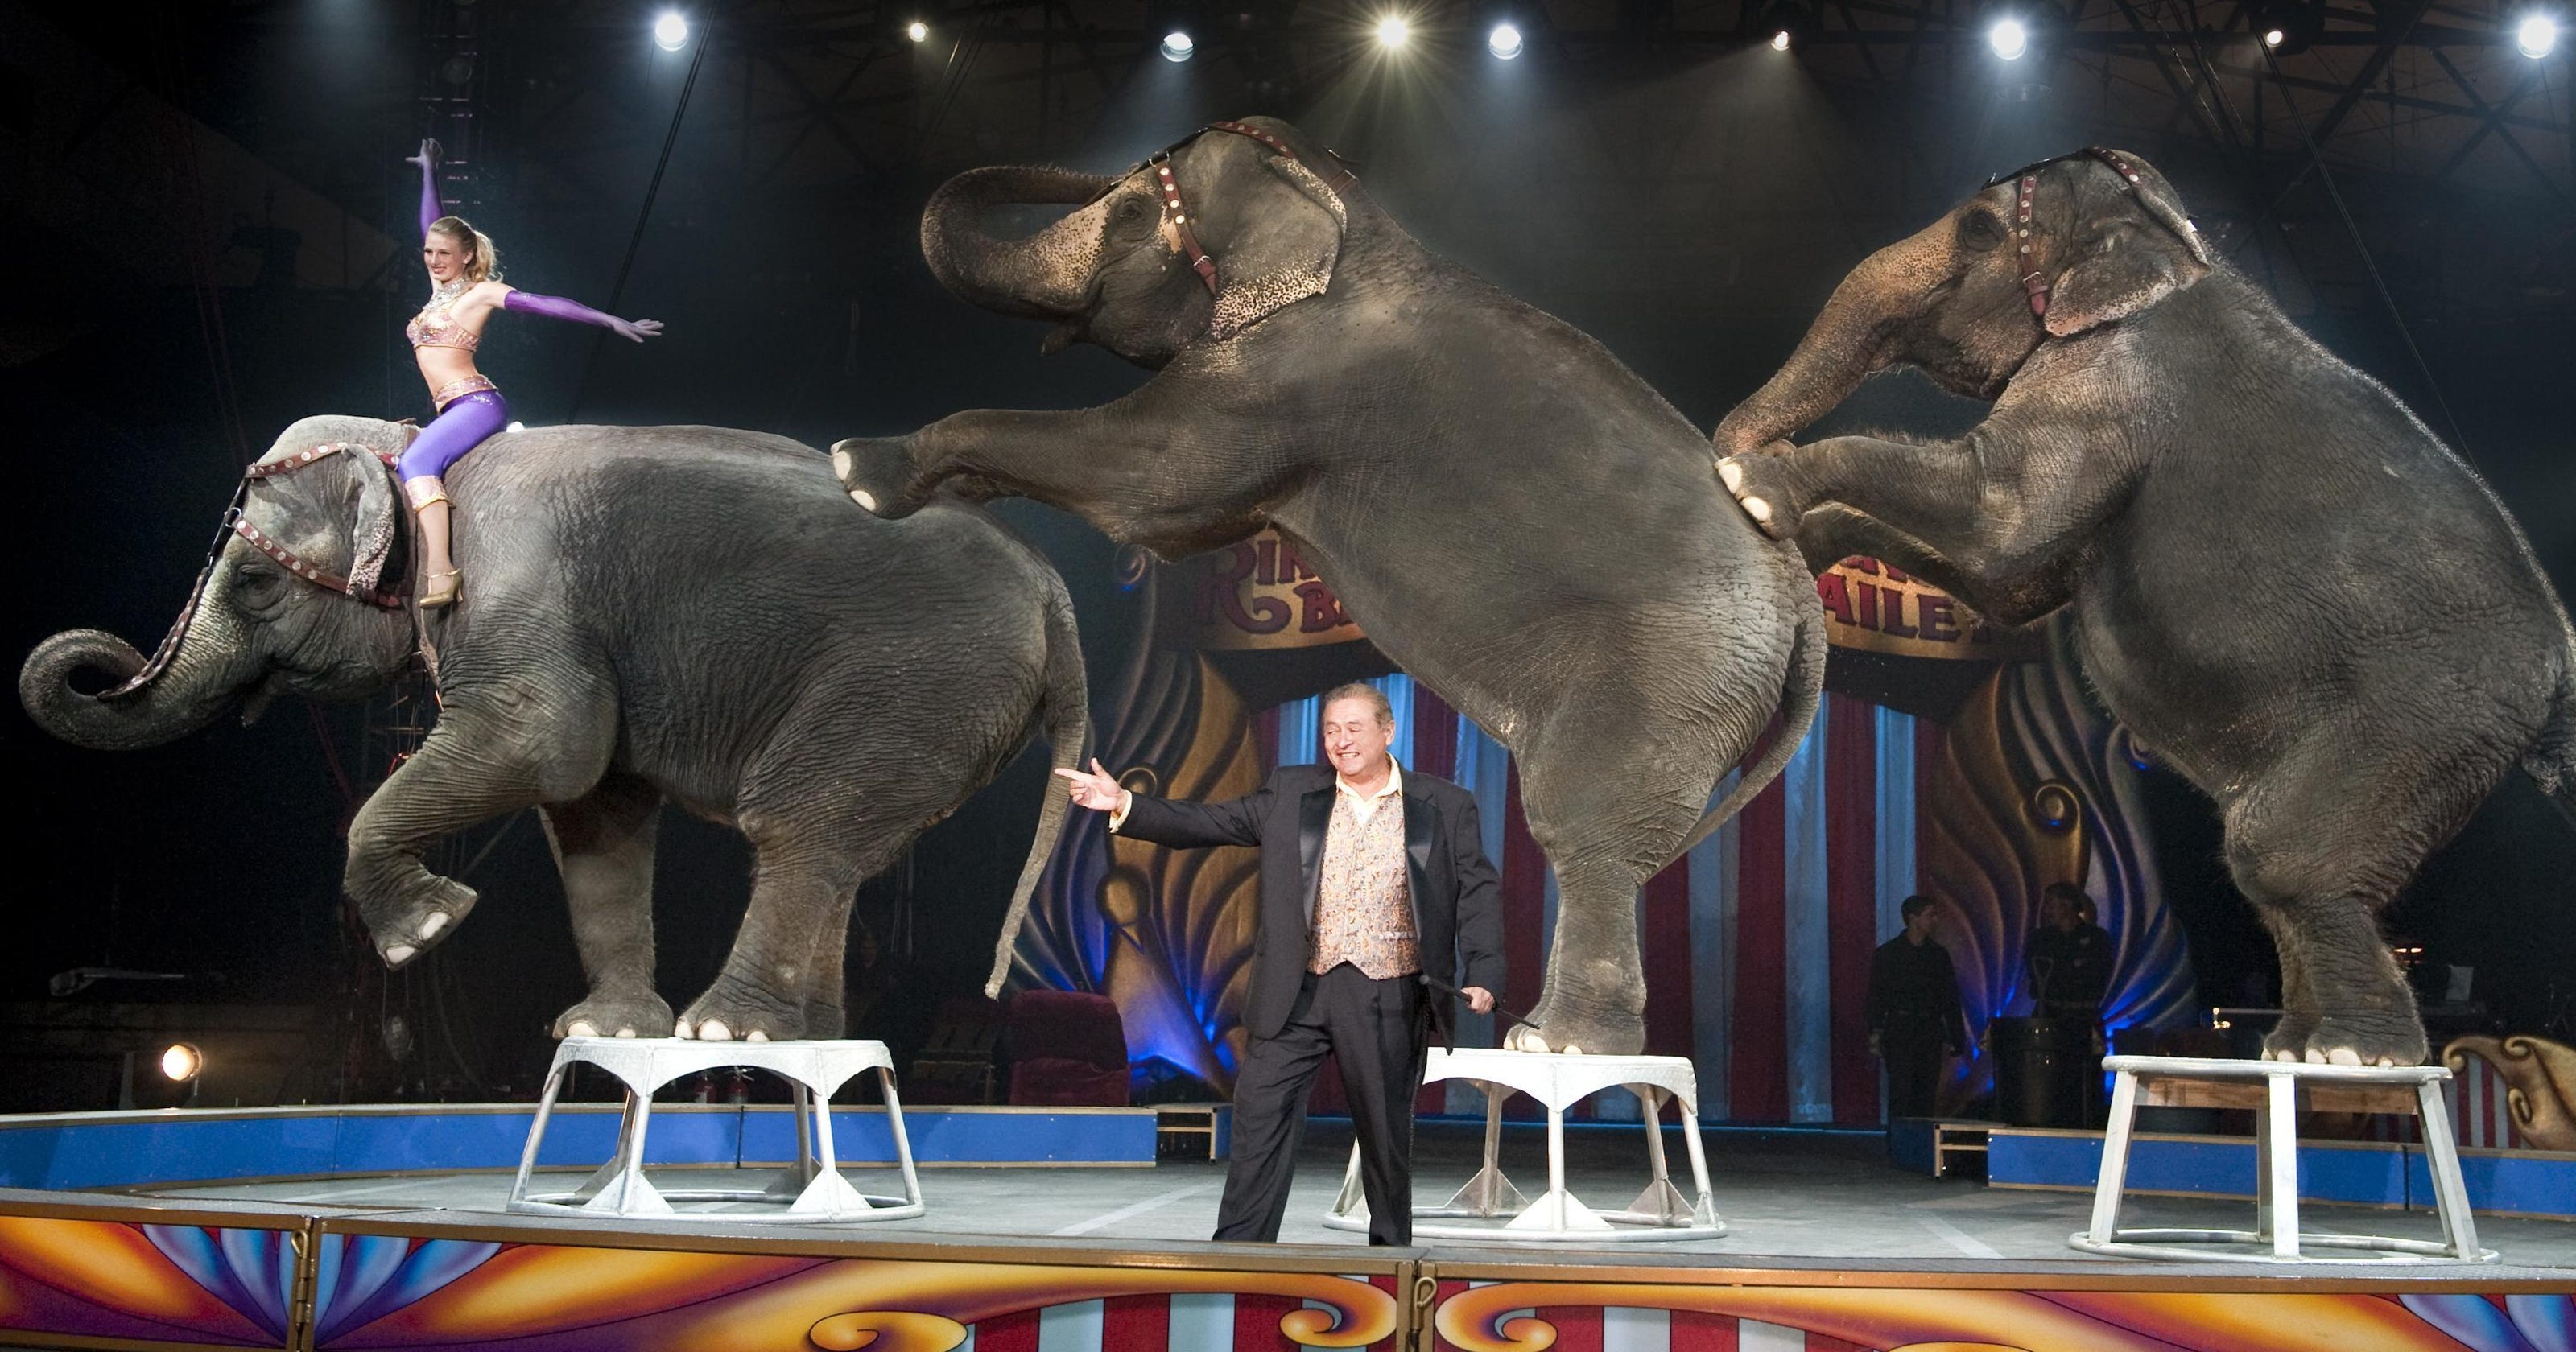 Circus Elephants Not Allowed To Perform At St Lucie County Fairgrounds 1480